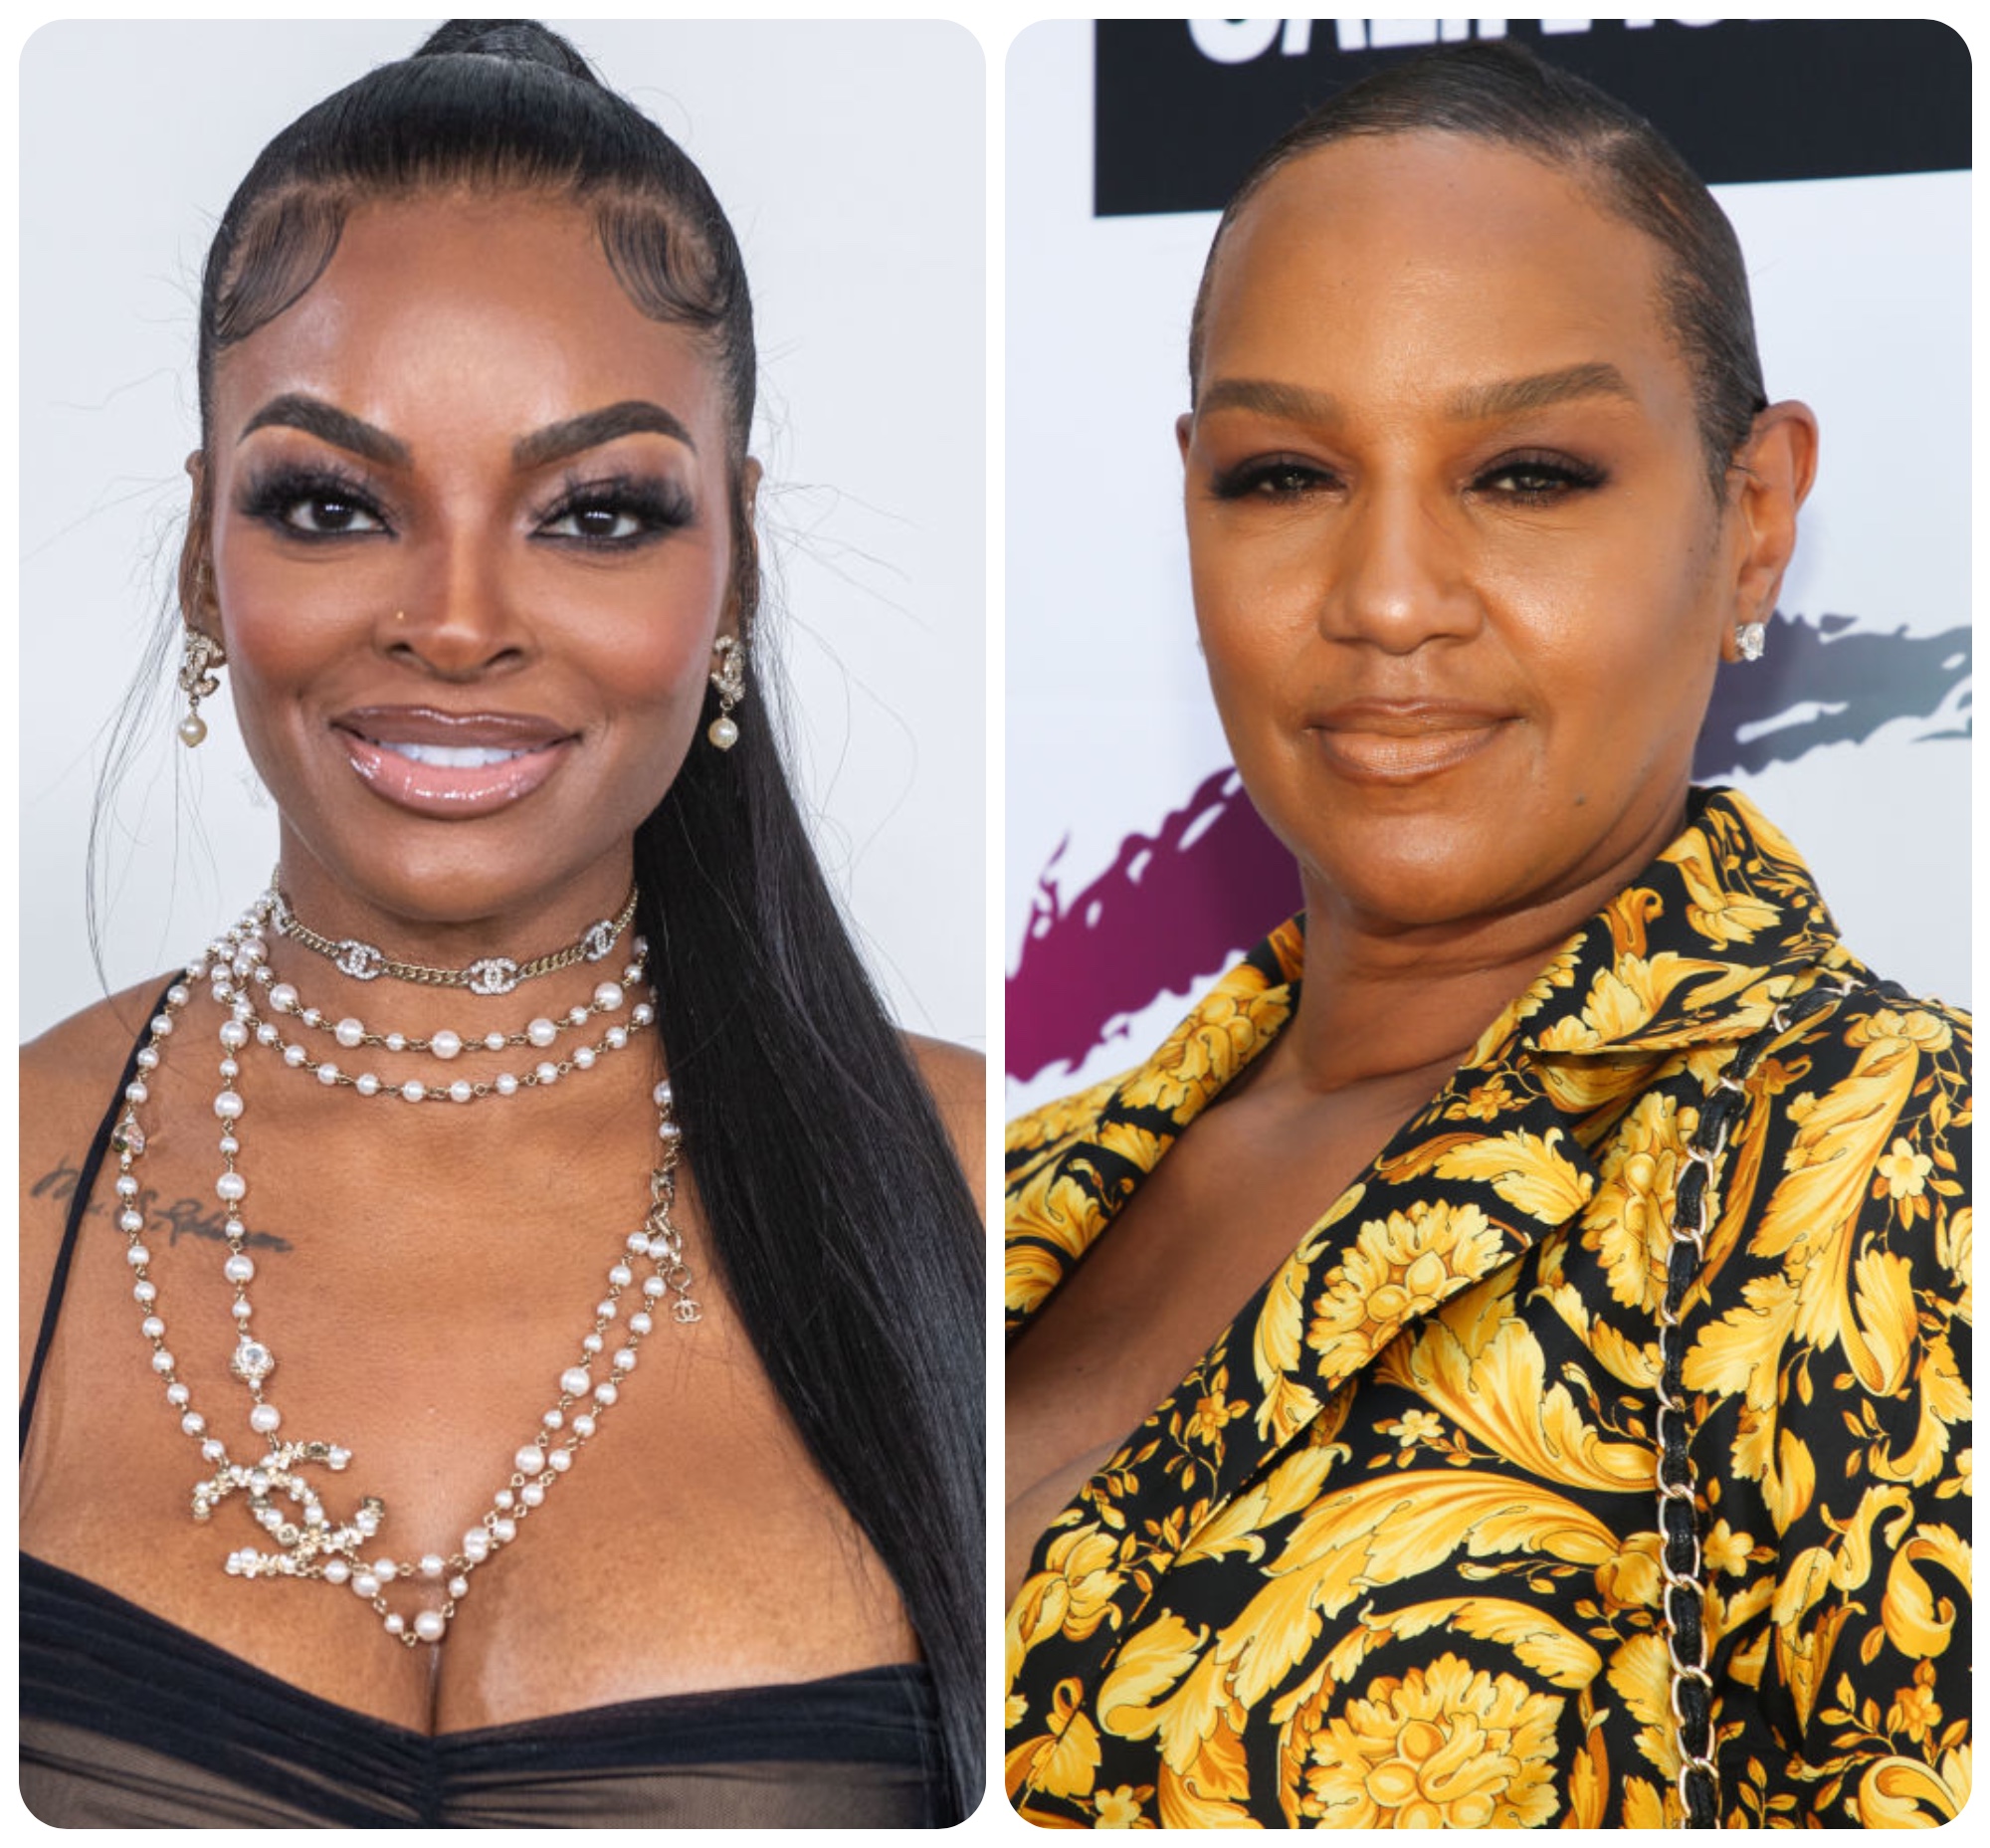 #BBWLA’s Brooke Bailey Shares Audio Of Jackie Christie Seemingly Suggesting She Uses Her Daughter’s Death For Money